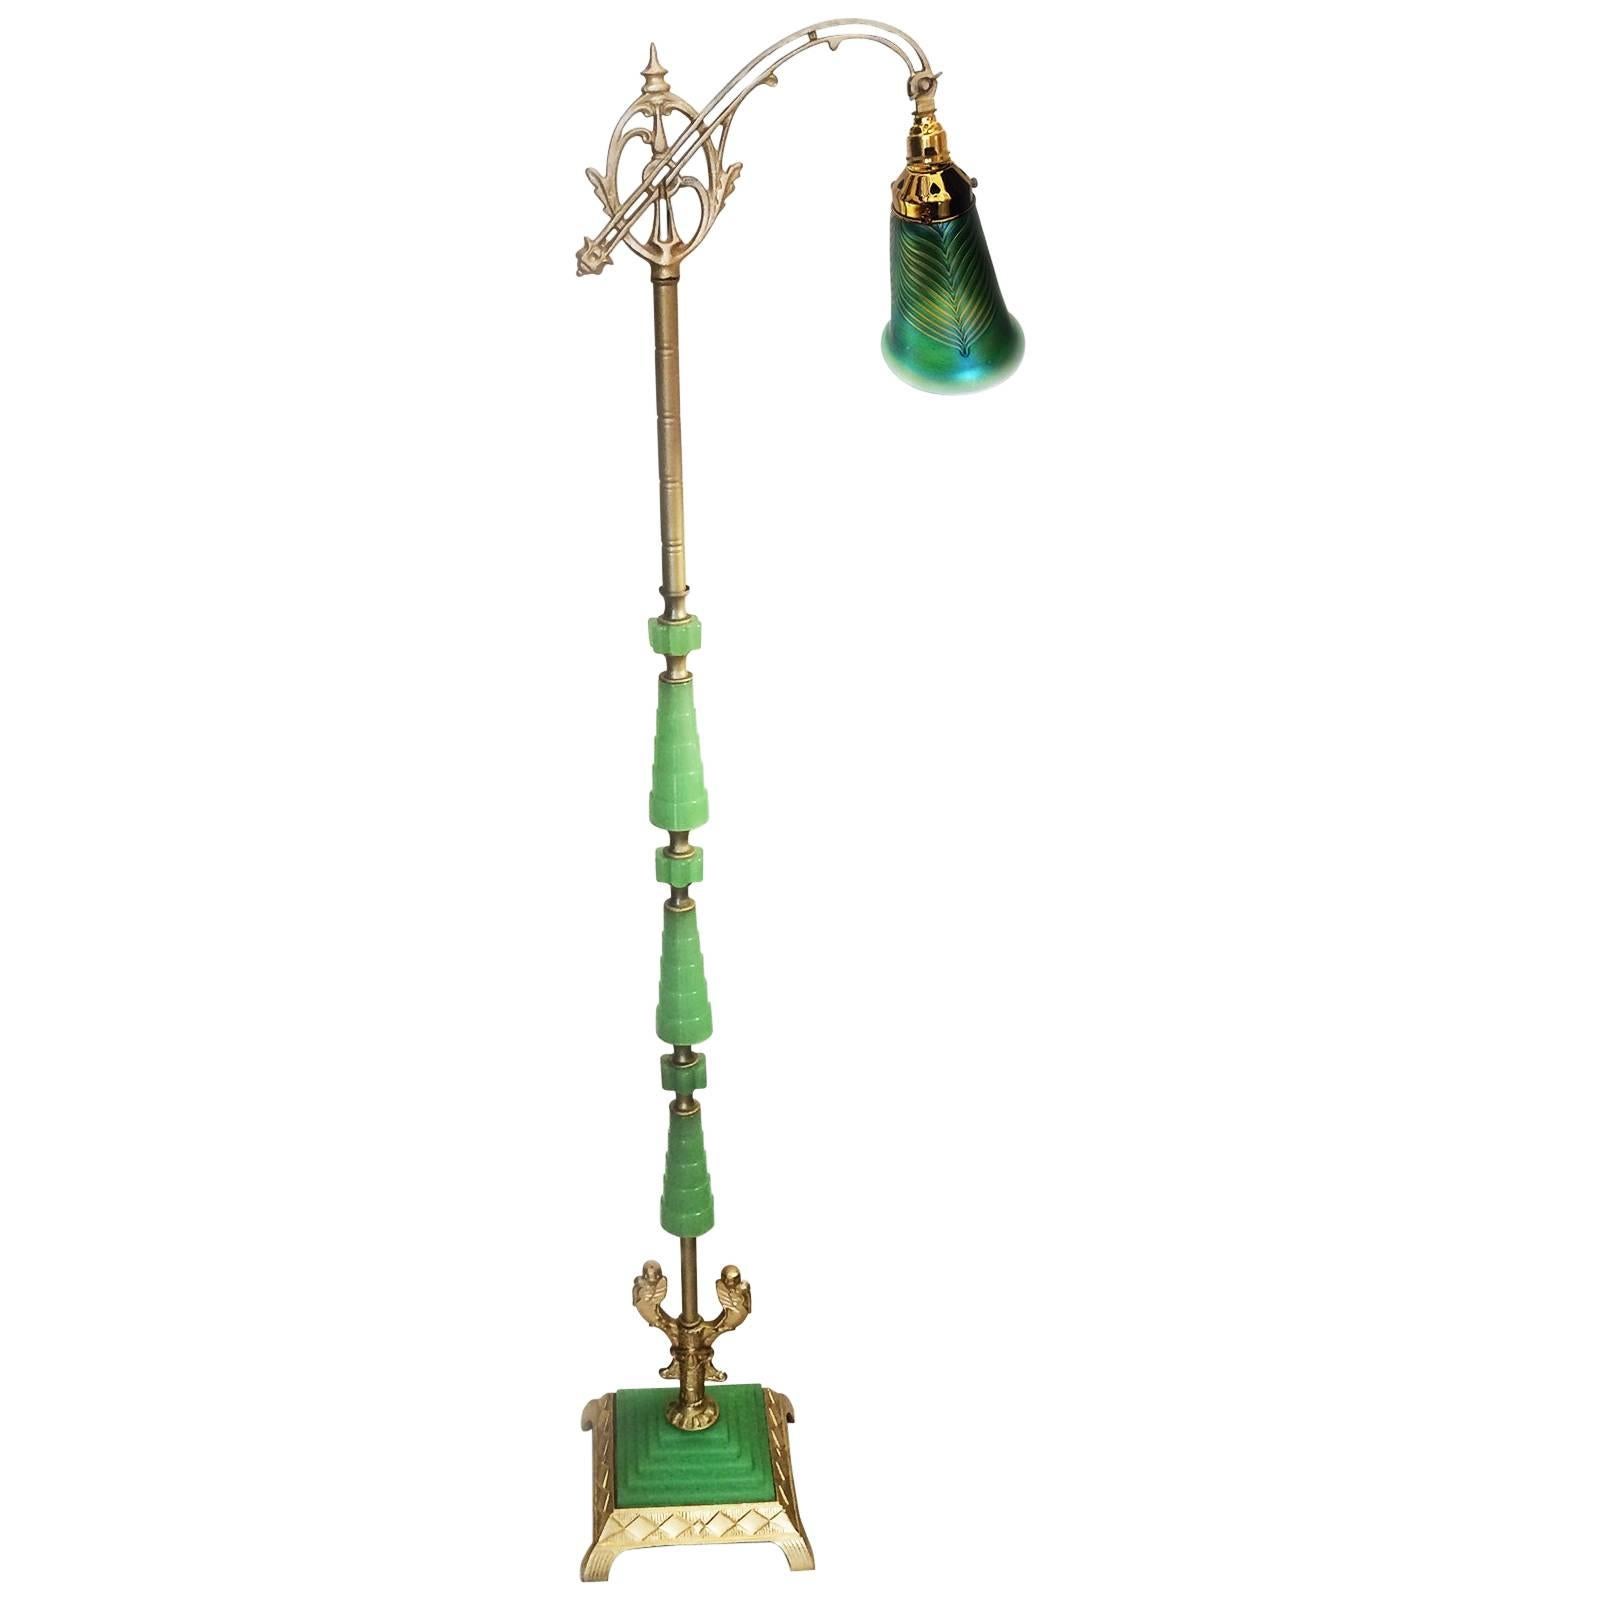 Art Nouveau Jadeite Glass and Irridescent Pulled Feather Shade Bridge Floor Lamp